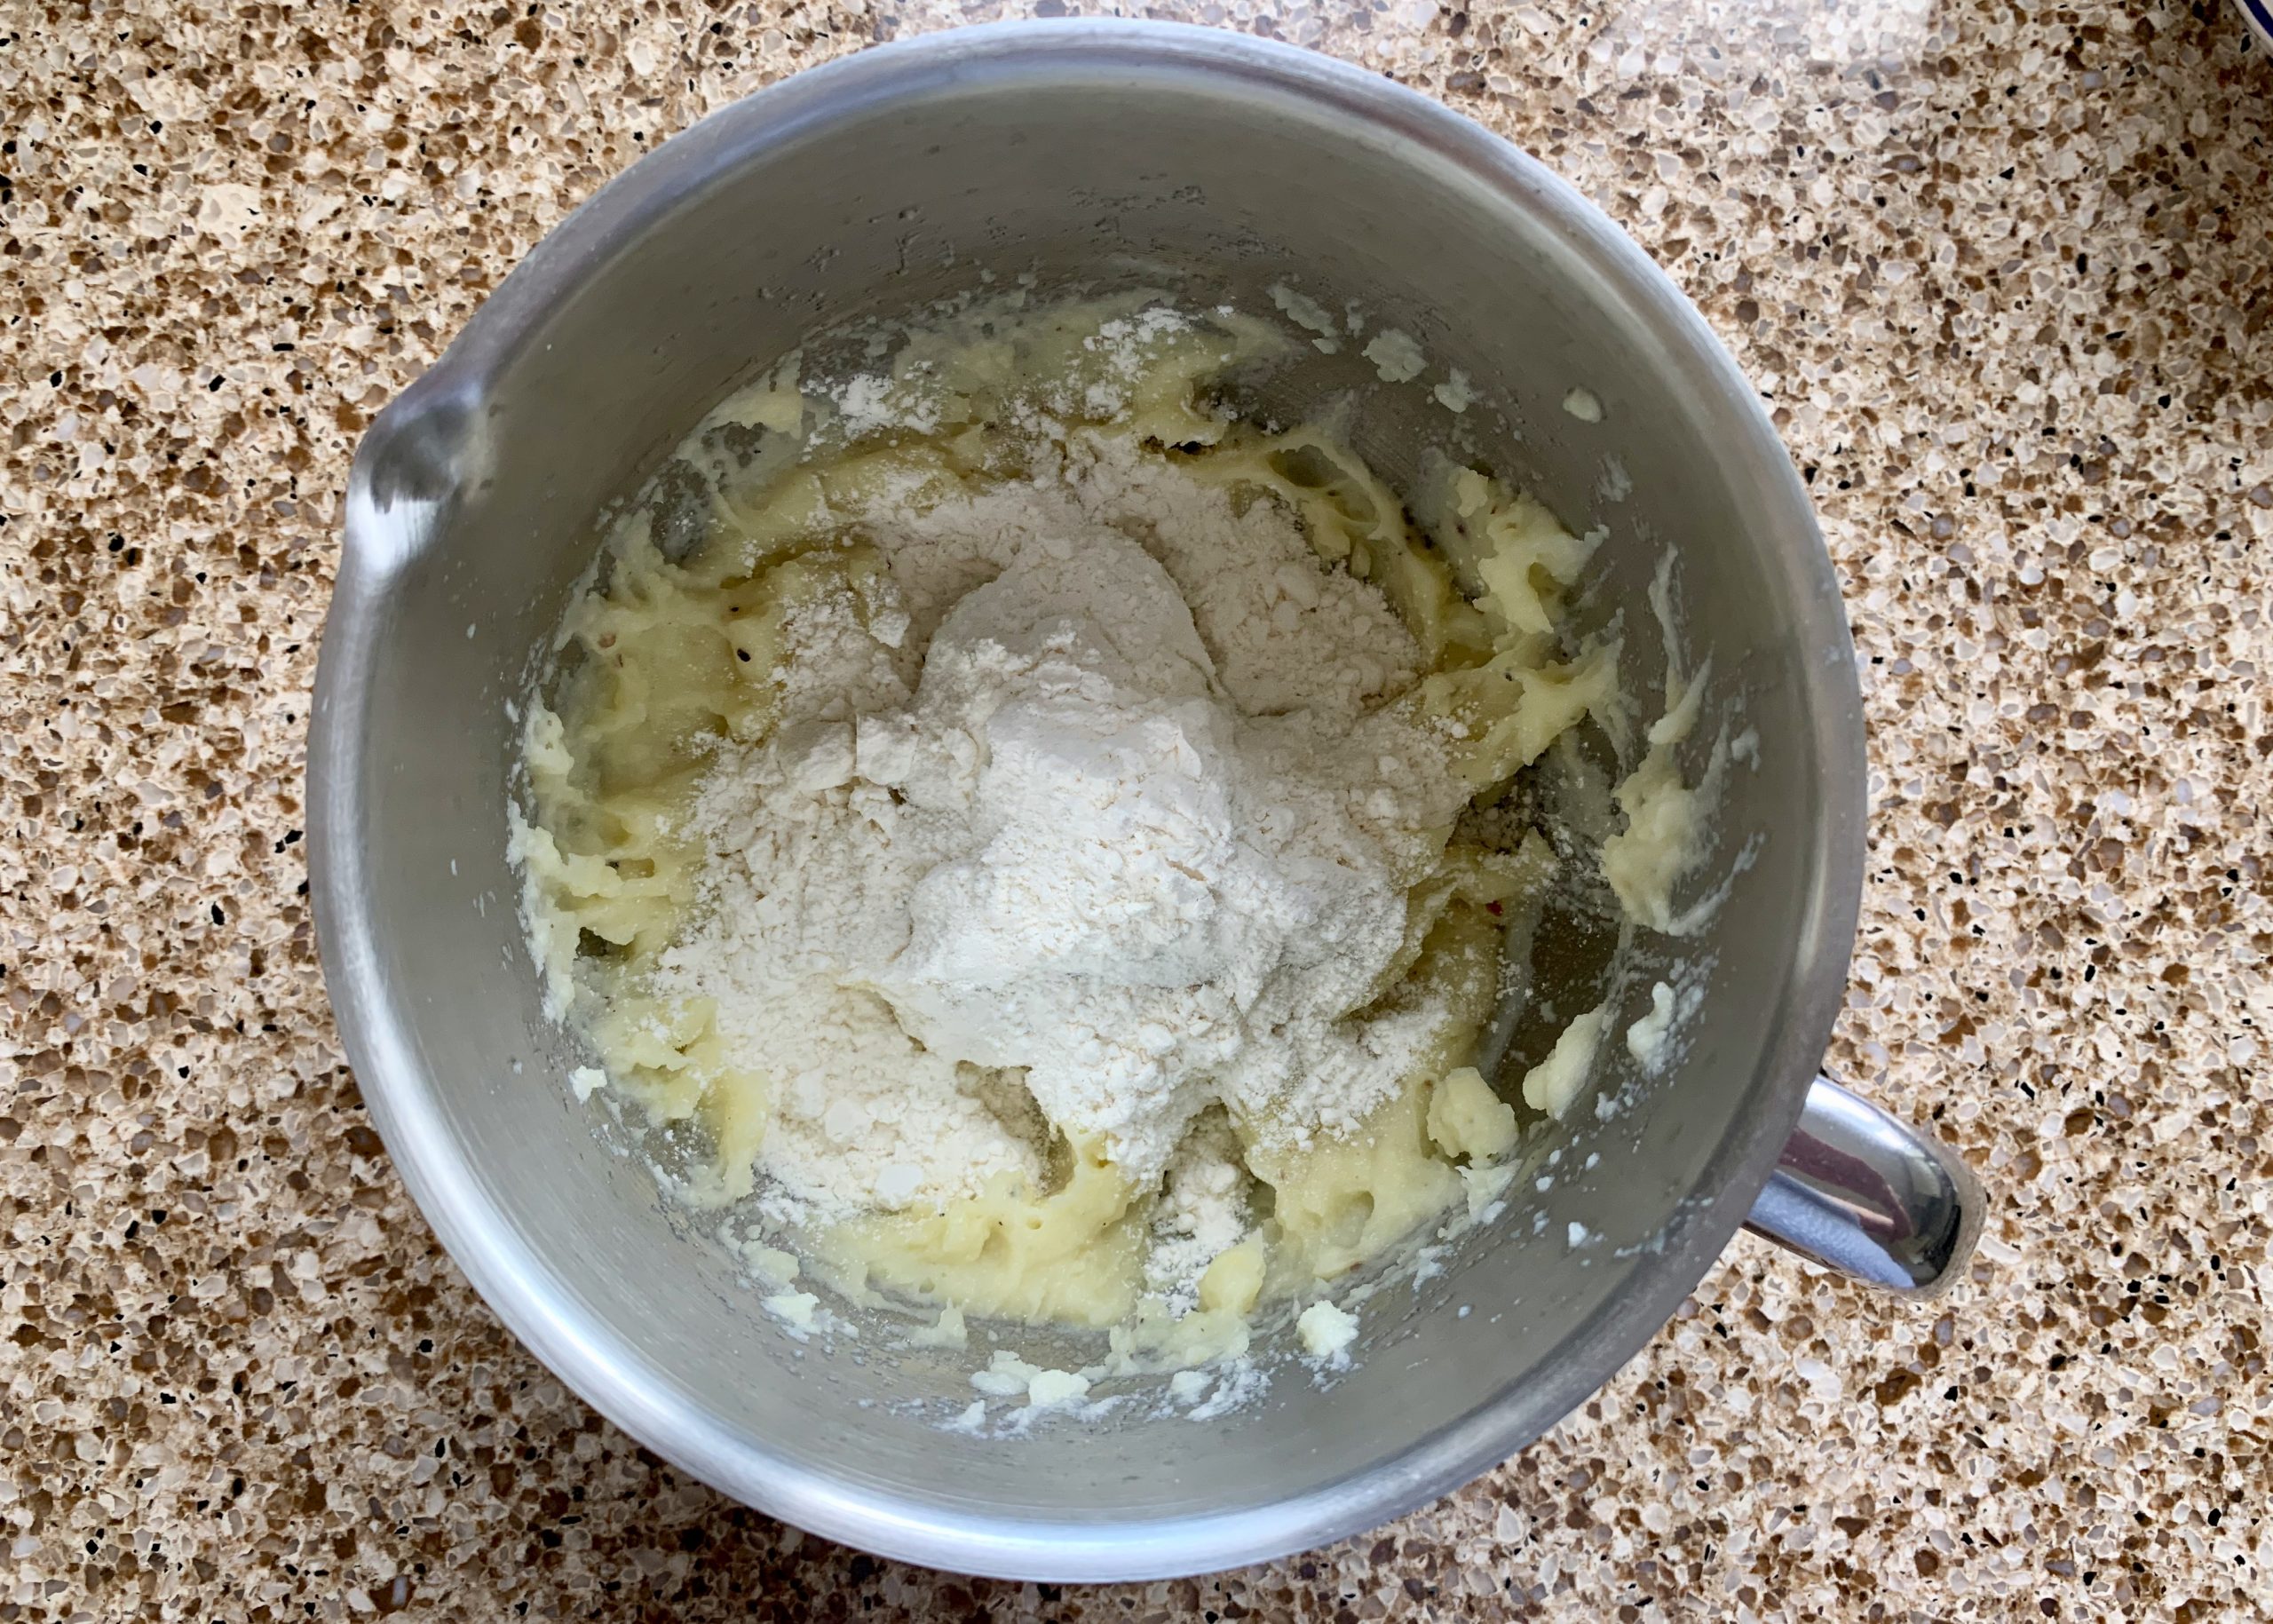 Mashed potato and flour in a pan